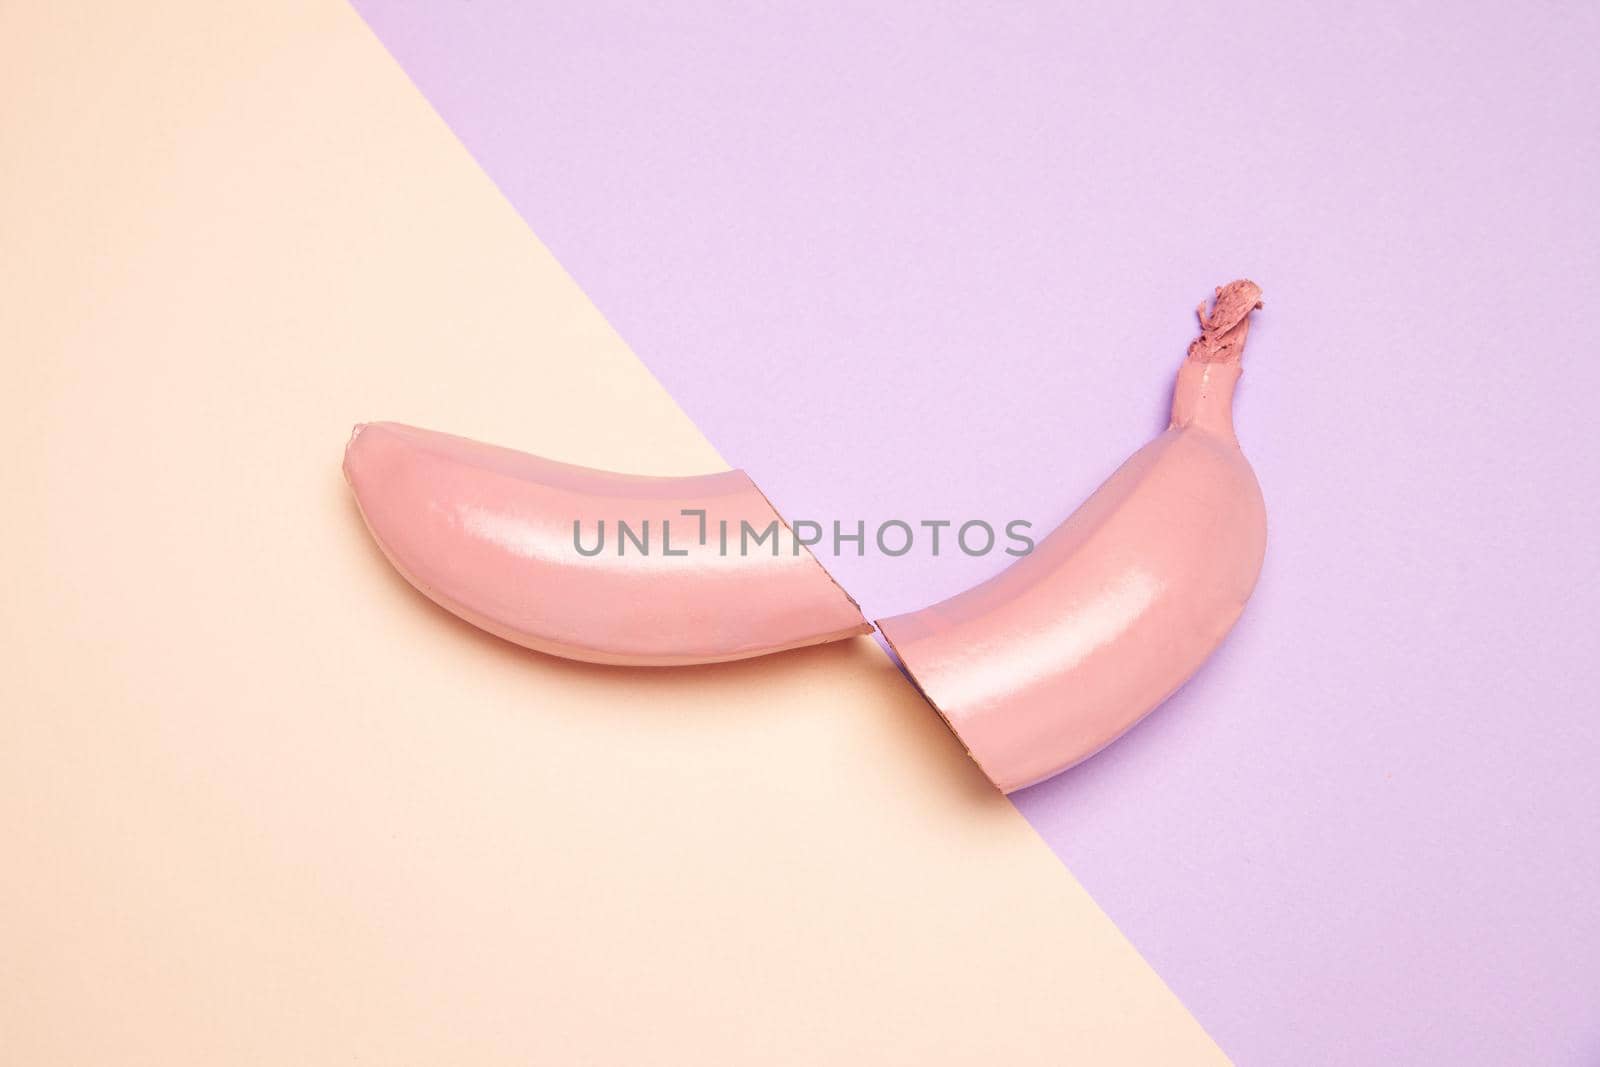 Halved unpeeled pink banana placed on two color surface by Julenochek